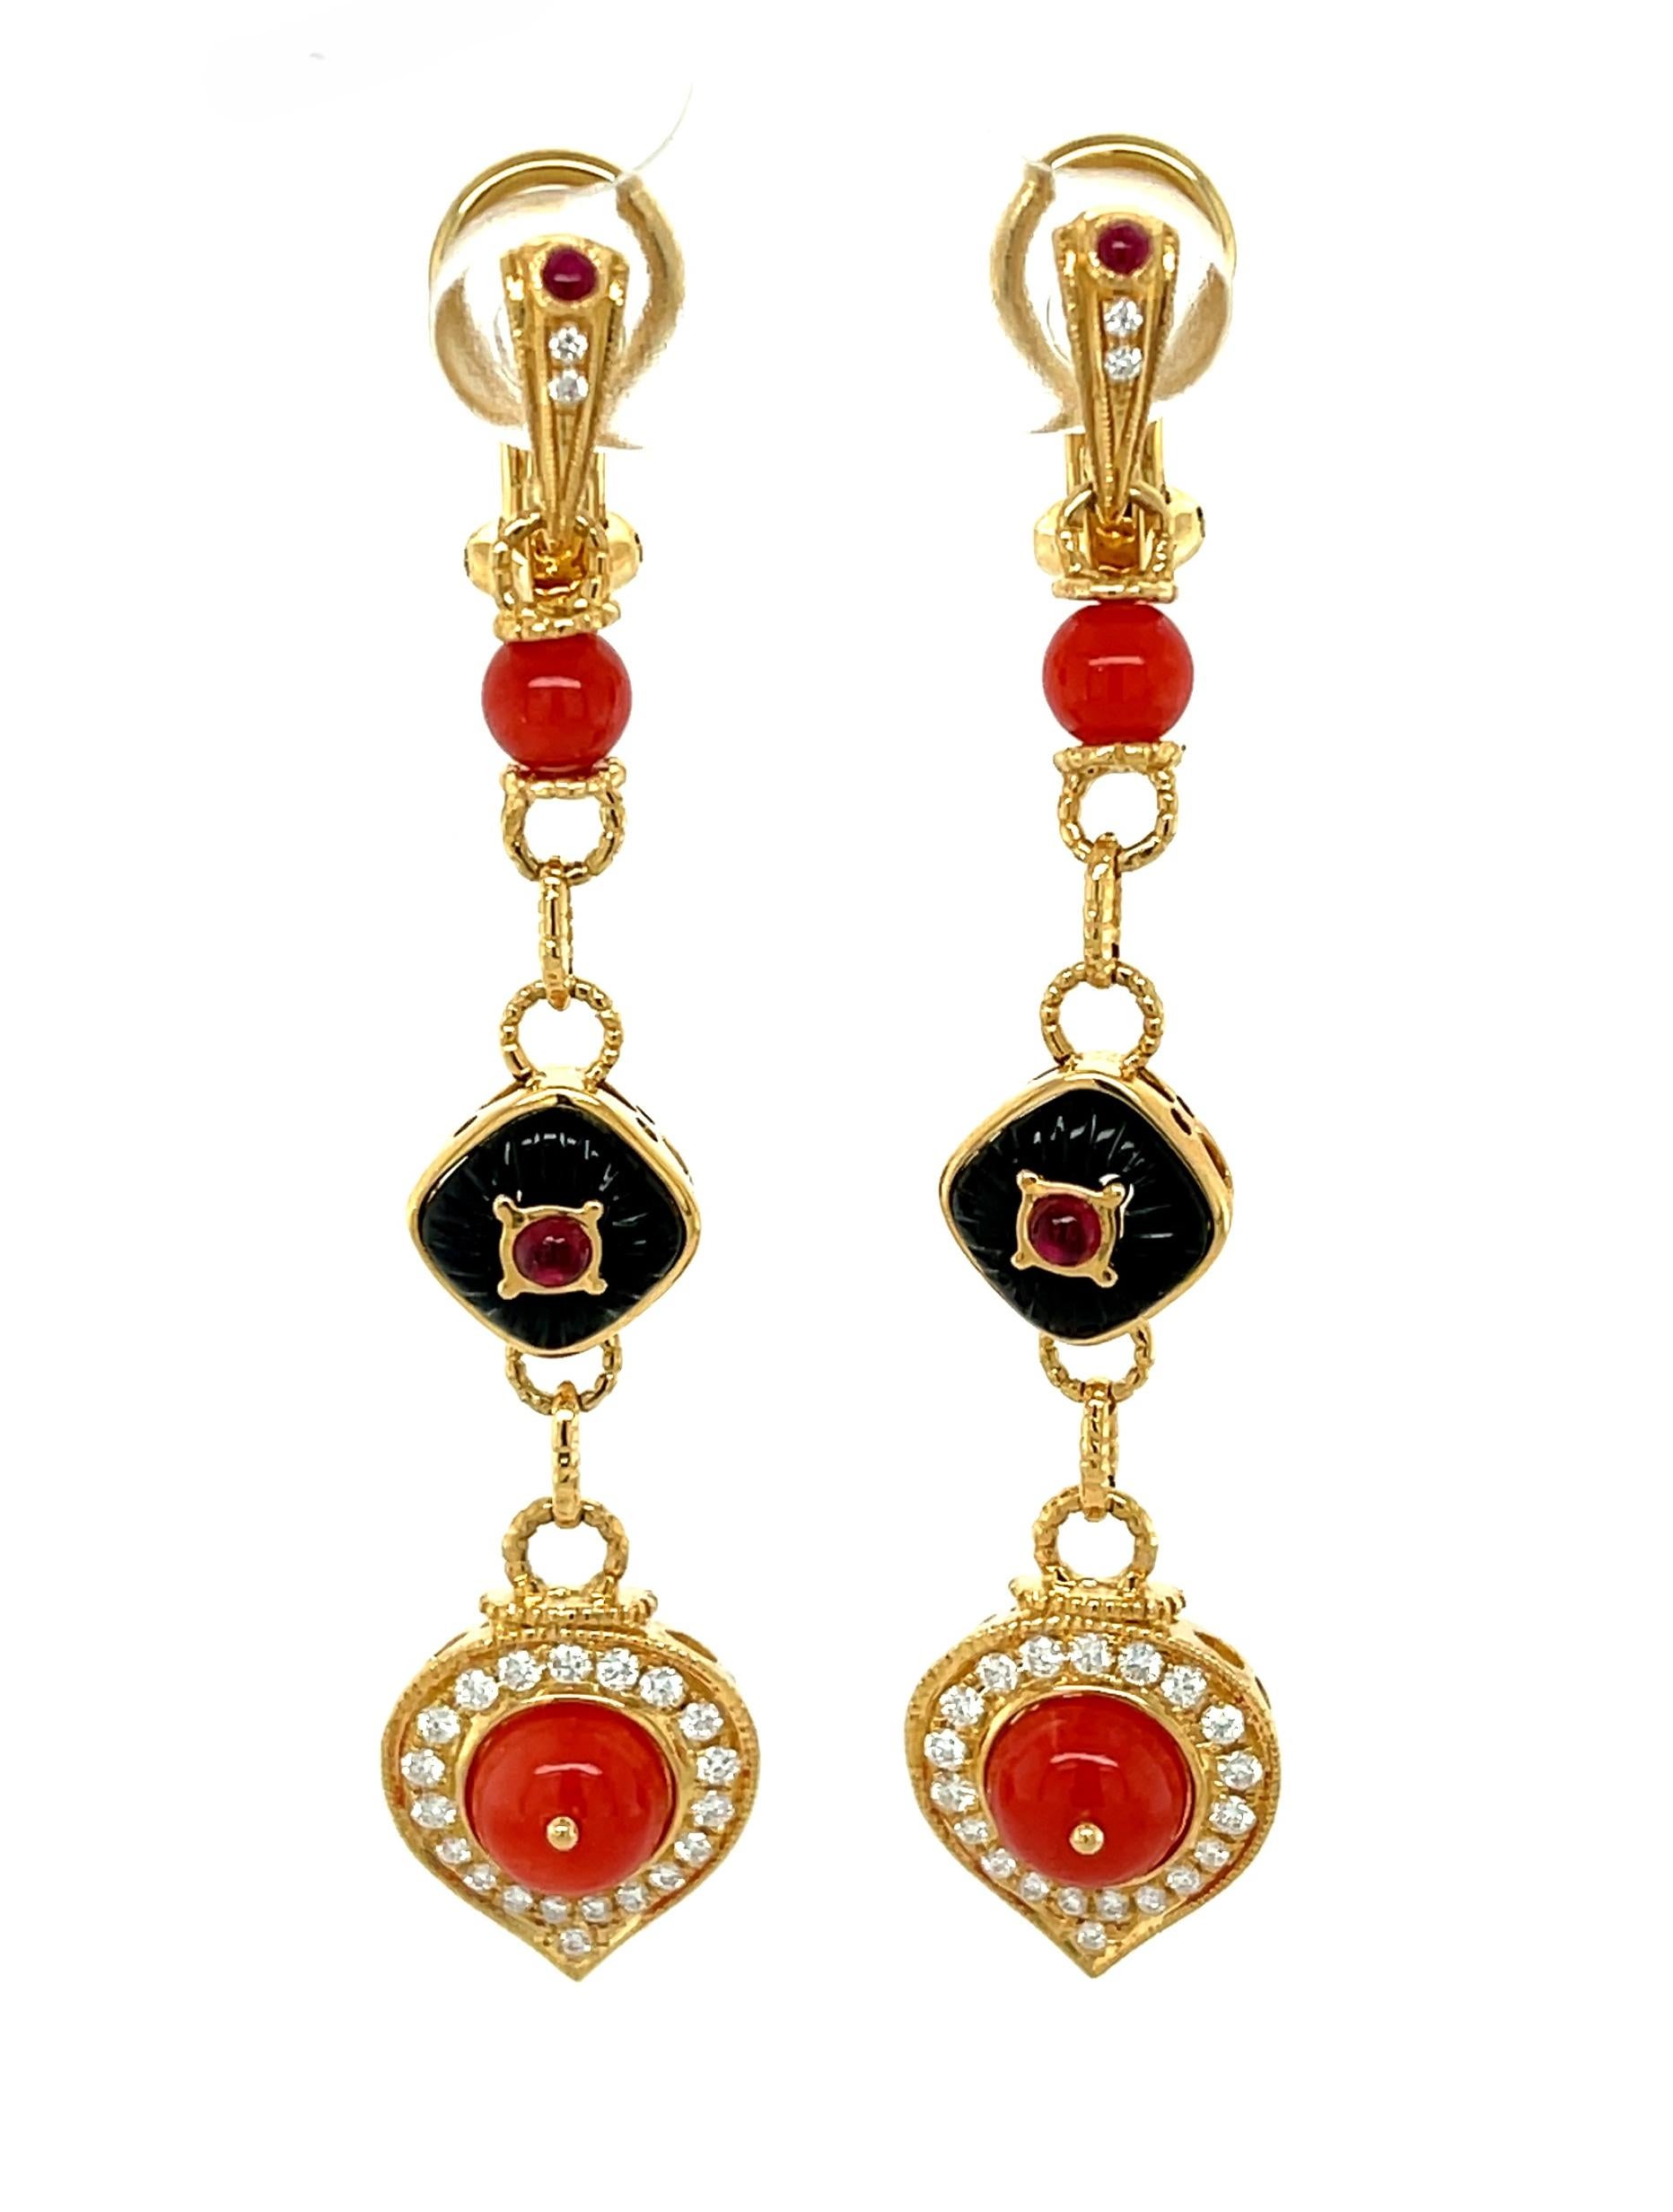 These unusual coral and onyx earrings are a strikingly beautiful combination of red and black.  18k yellow gold spears set with petite ruby cabochons and diamonds sit comfortably on the earlobe, secured by French clip omega backs. Dangling below is